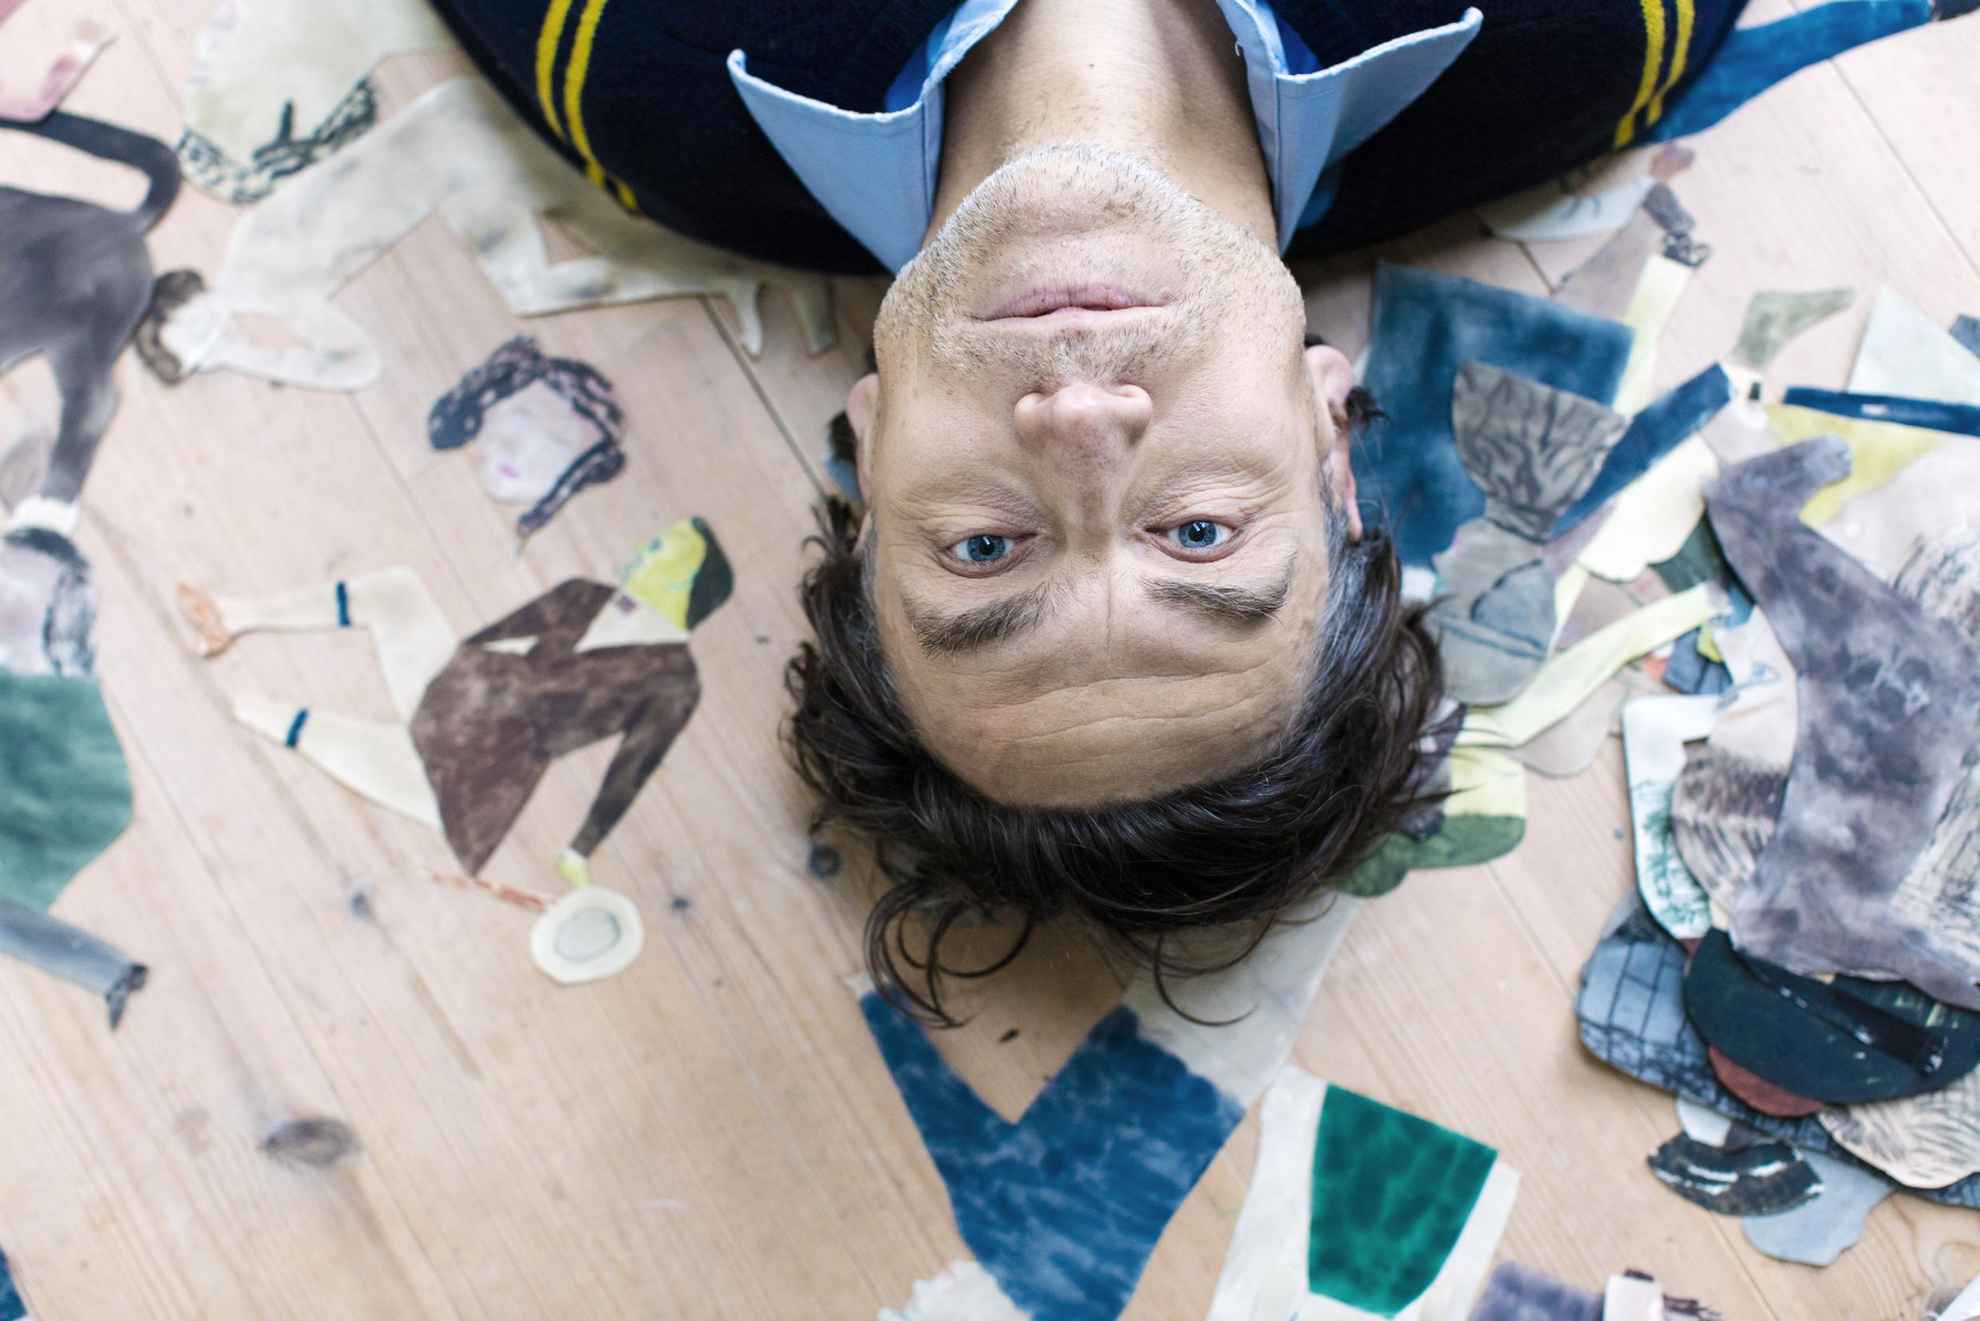 A close-up image taken from above at the artist Jockum Nordström when he is lying on the floor together with his paintings and illustrations.